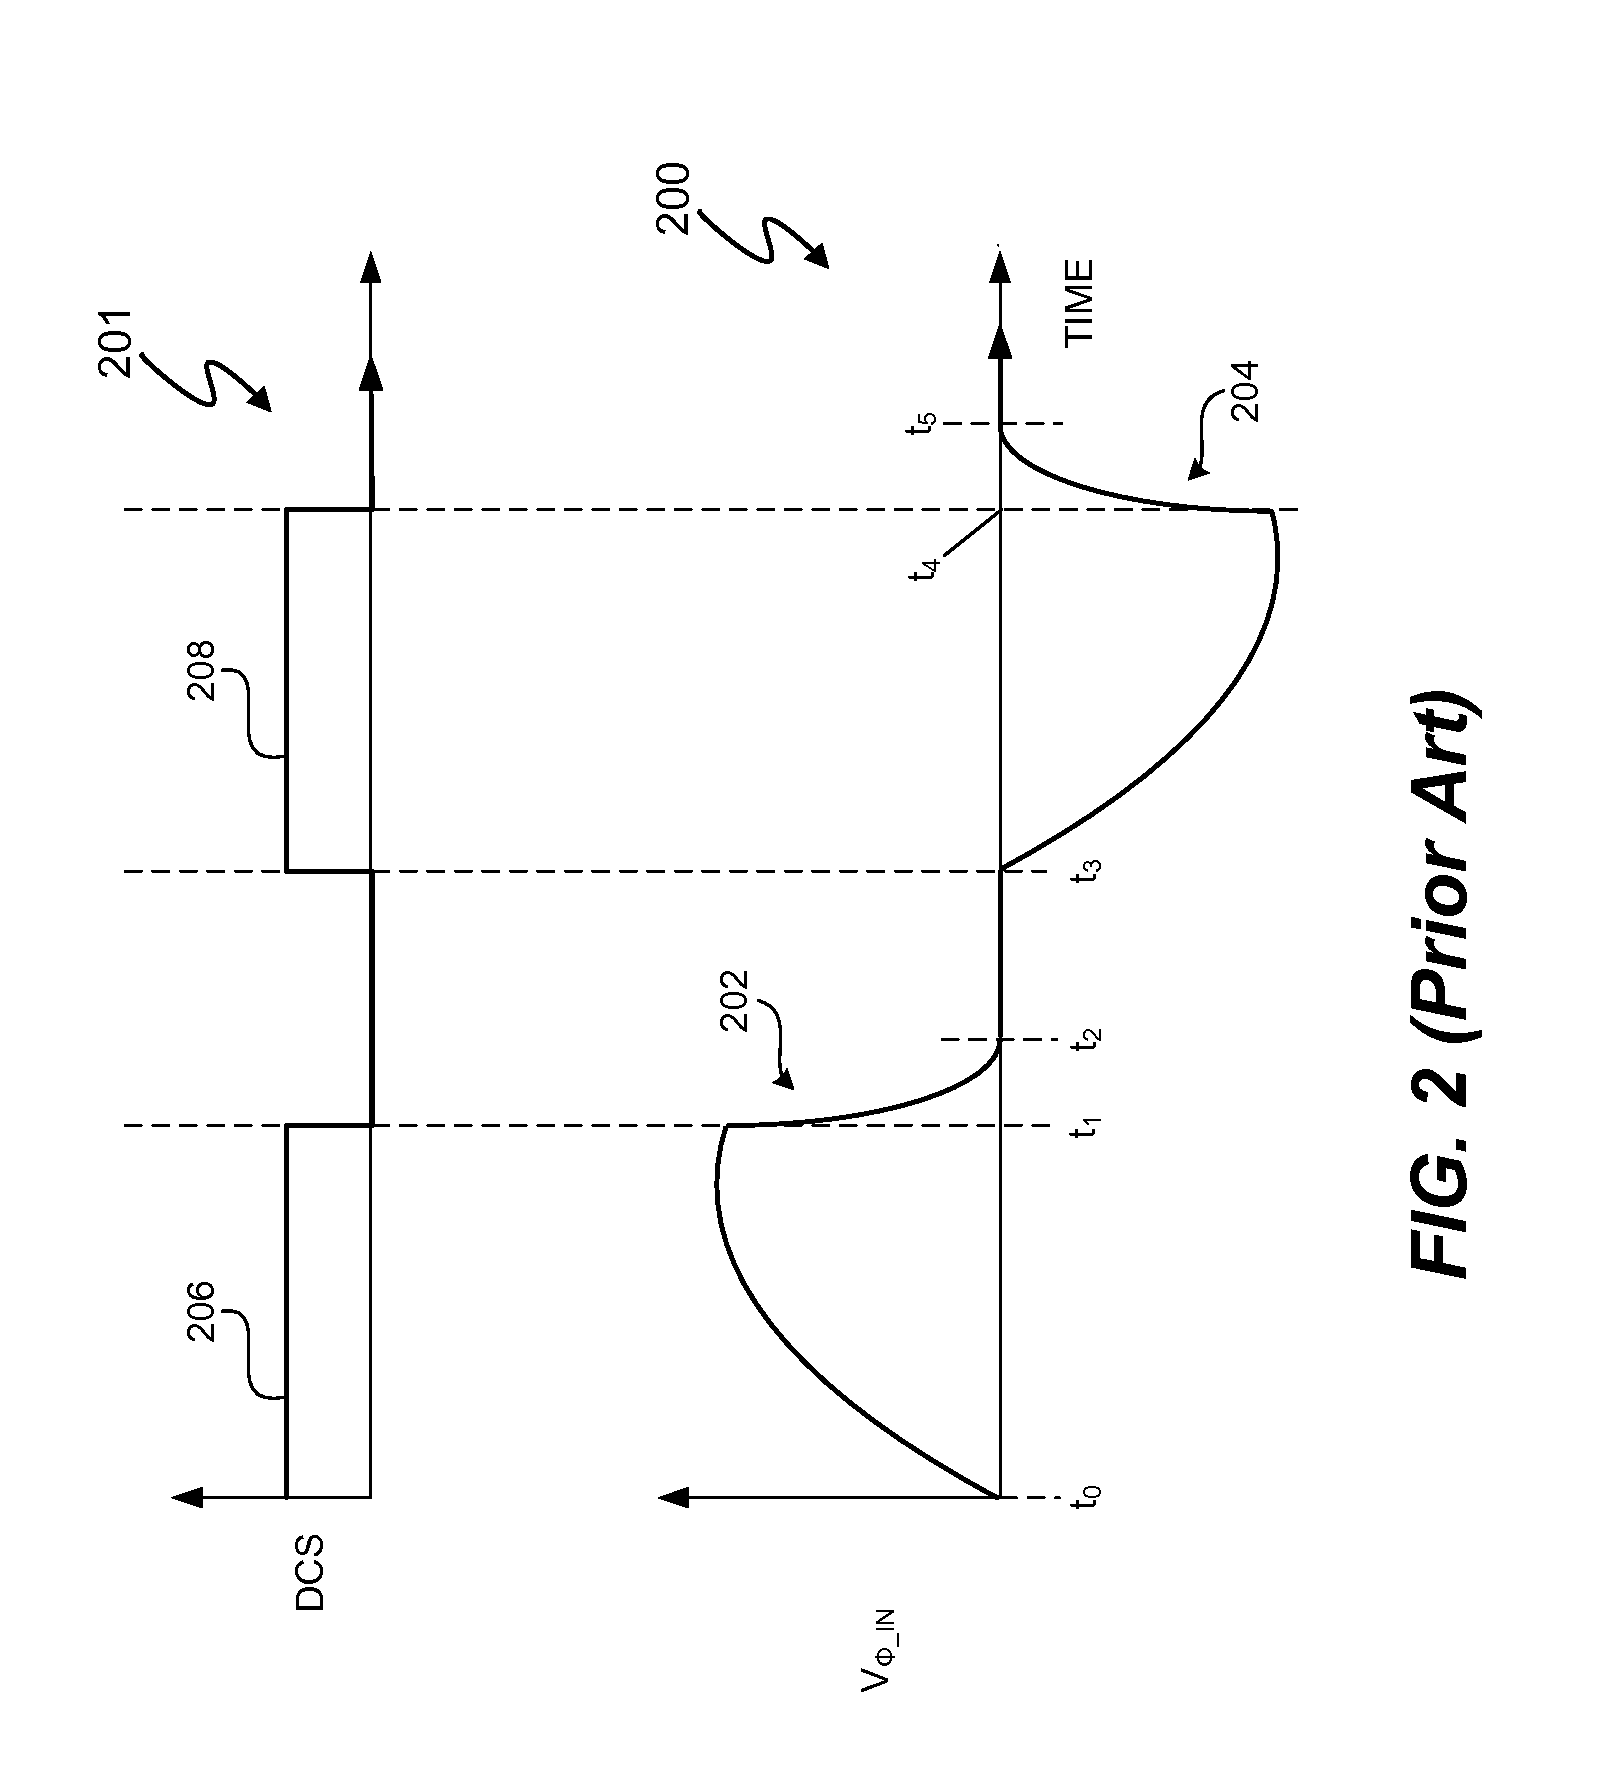 Trailing Edge Dimmer Compatibility With Dimmer High Resistance Prediction